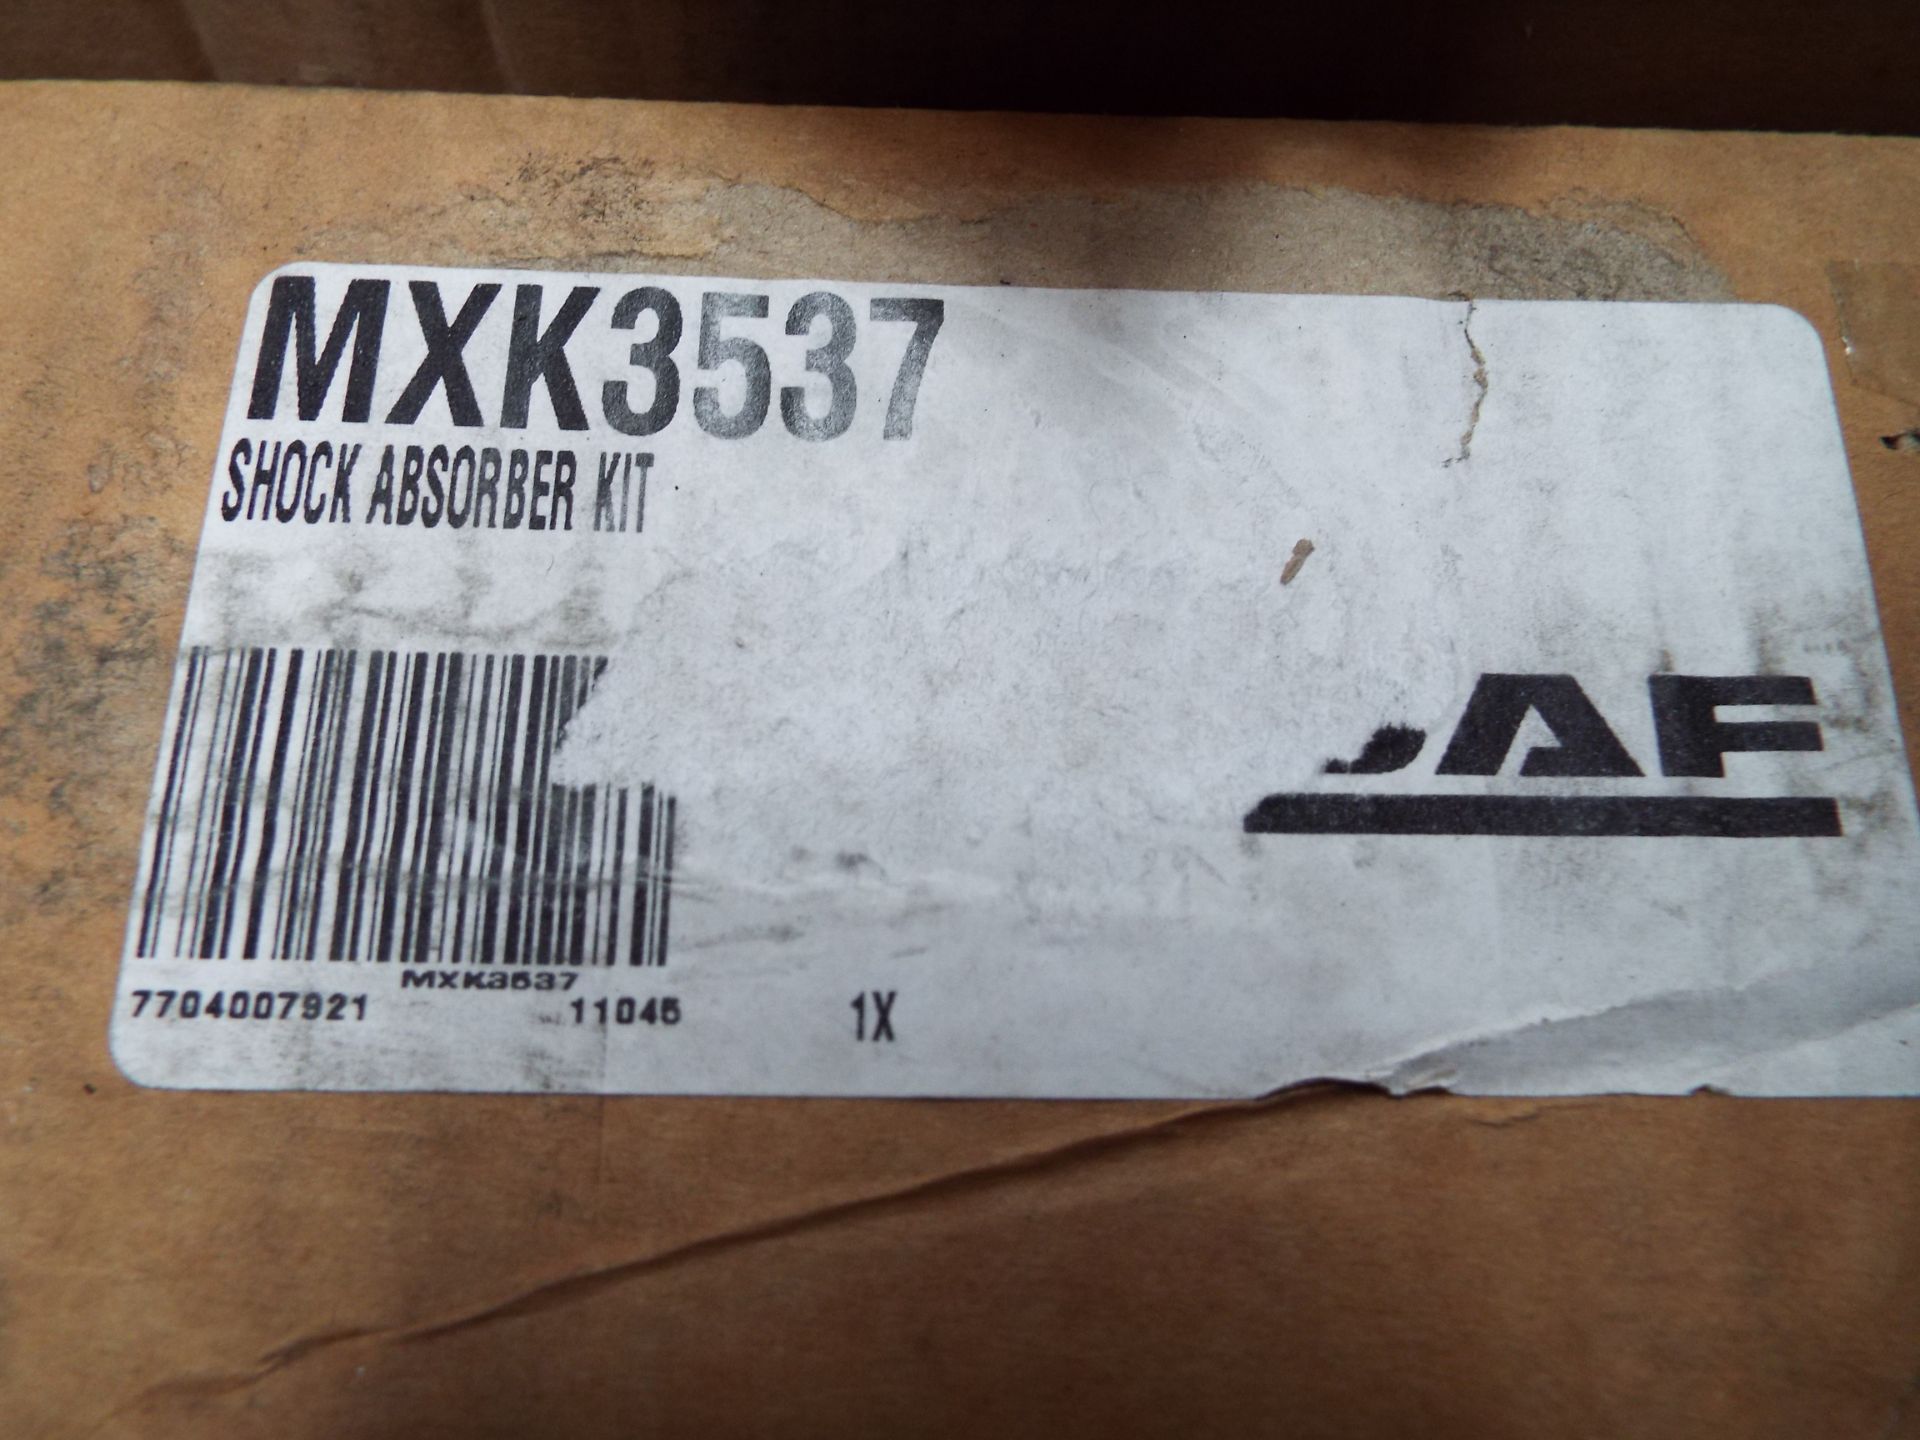 6 x DAF Shock Absorbers P/No MXK3537 - Image 3 of 4